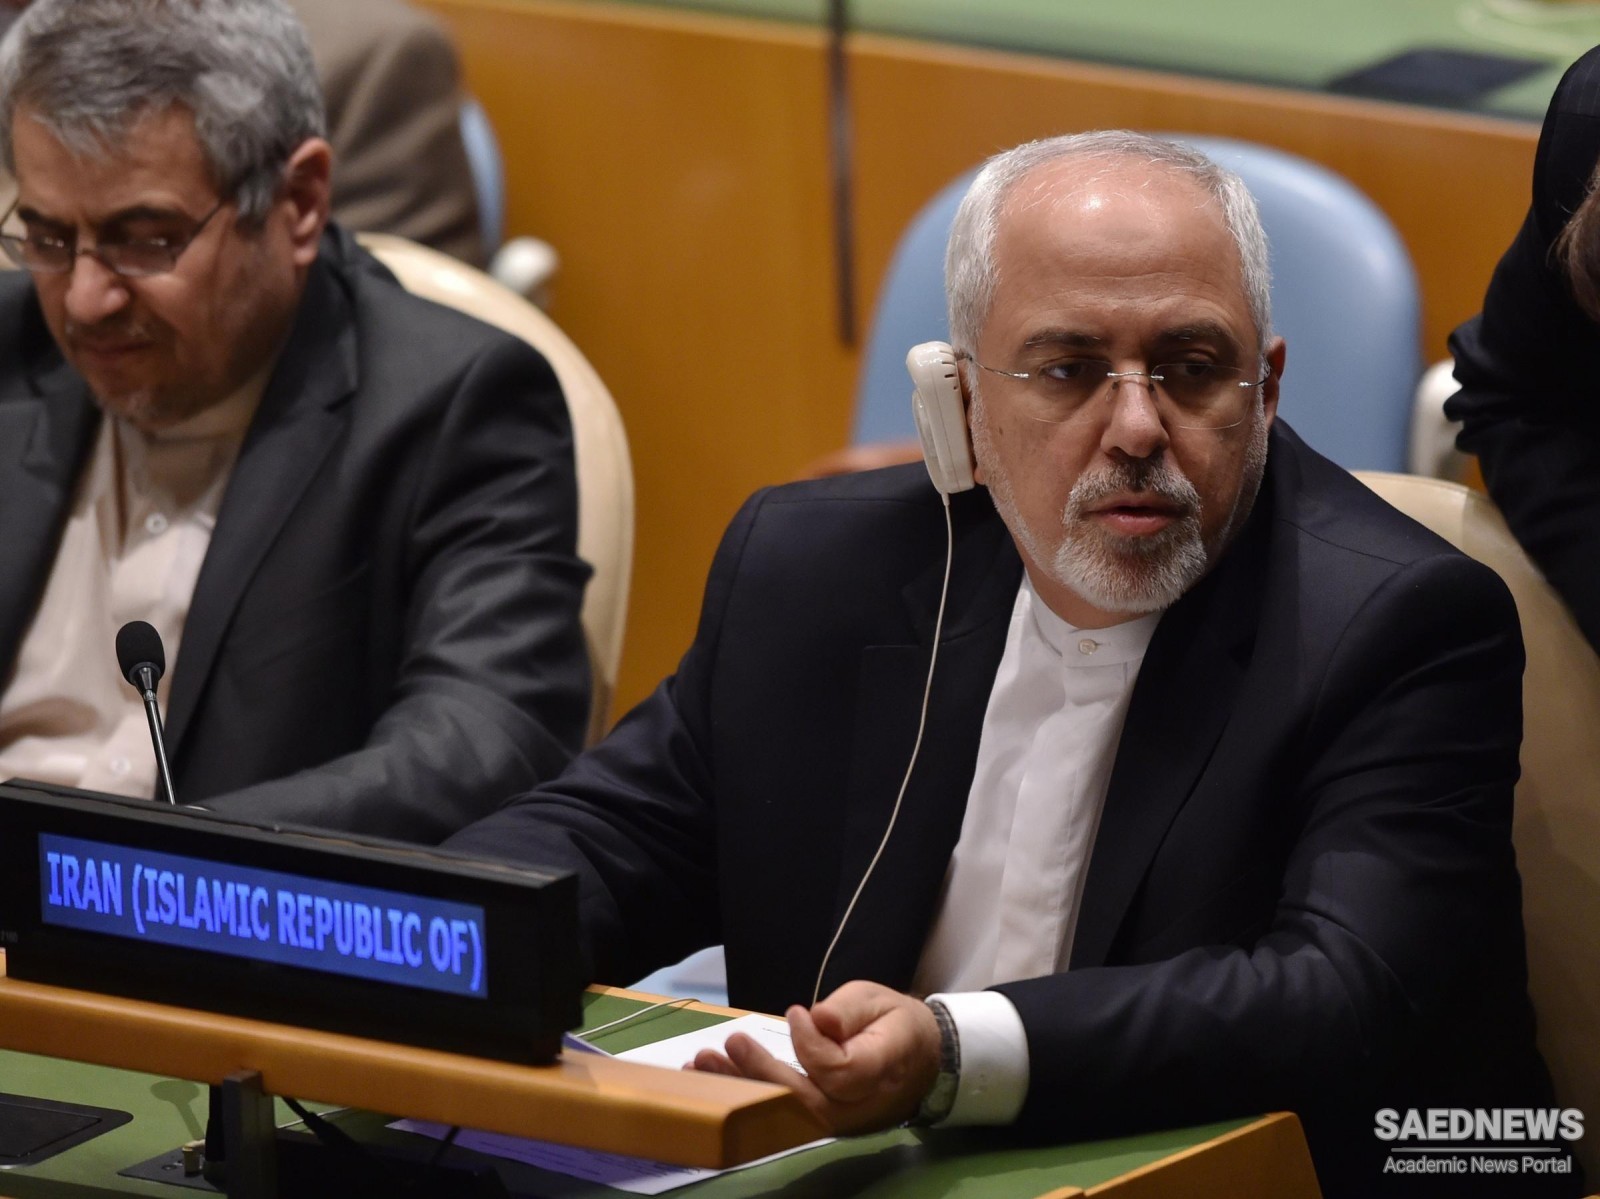 Zarif Rebukes Trump Administration of the Damage Done by Its Decisions to the Planet